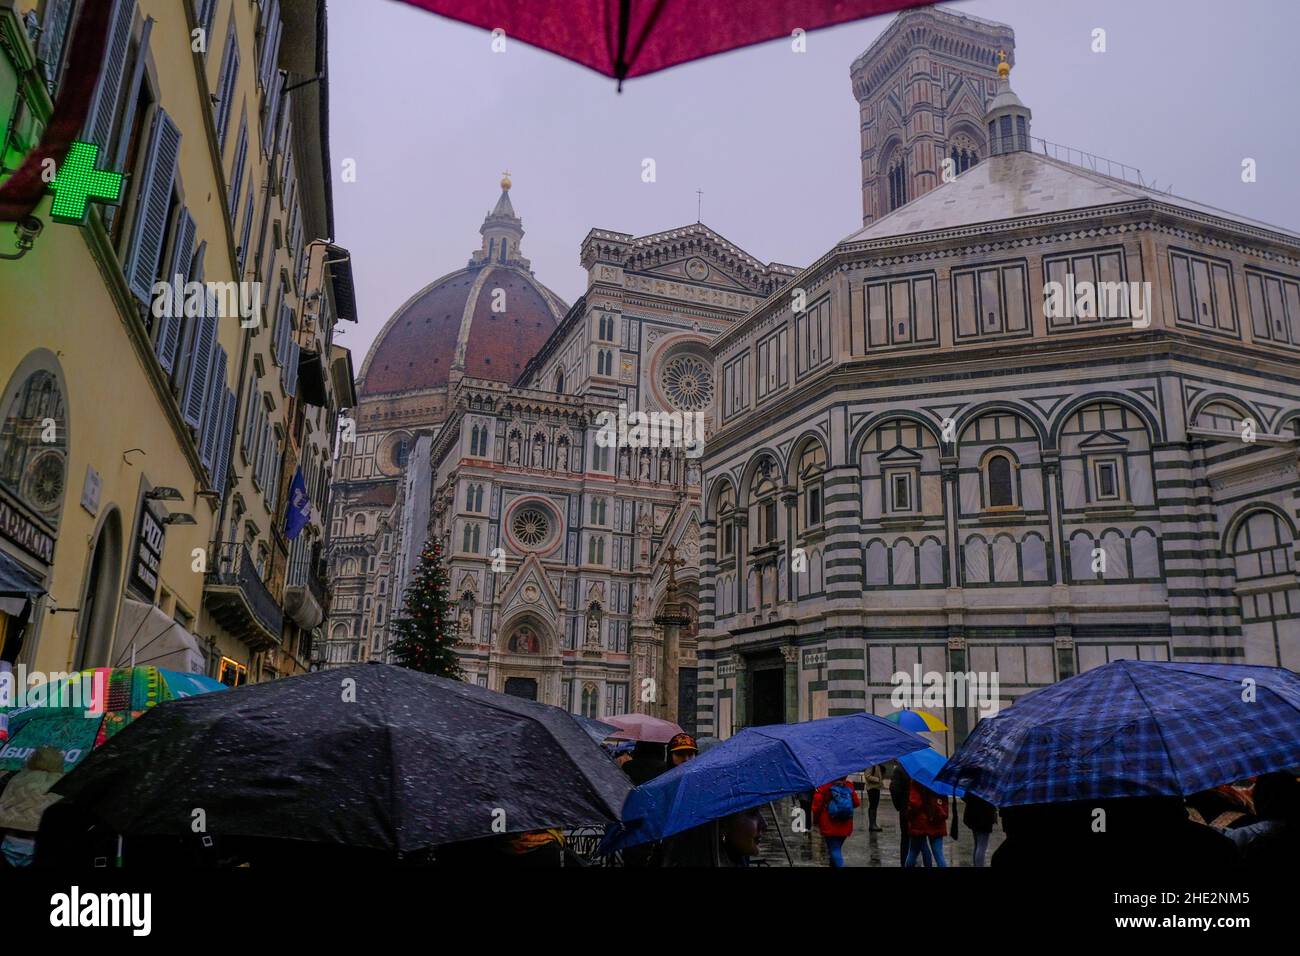 Florence, Italy: Dome of Santa Maria del Fiore close-up across dramatic sky, buildings, across people with umbrellas on a rainy day. Stock Photo